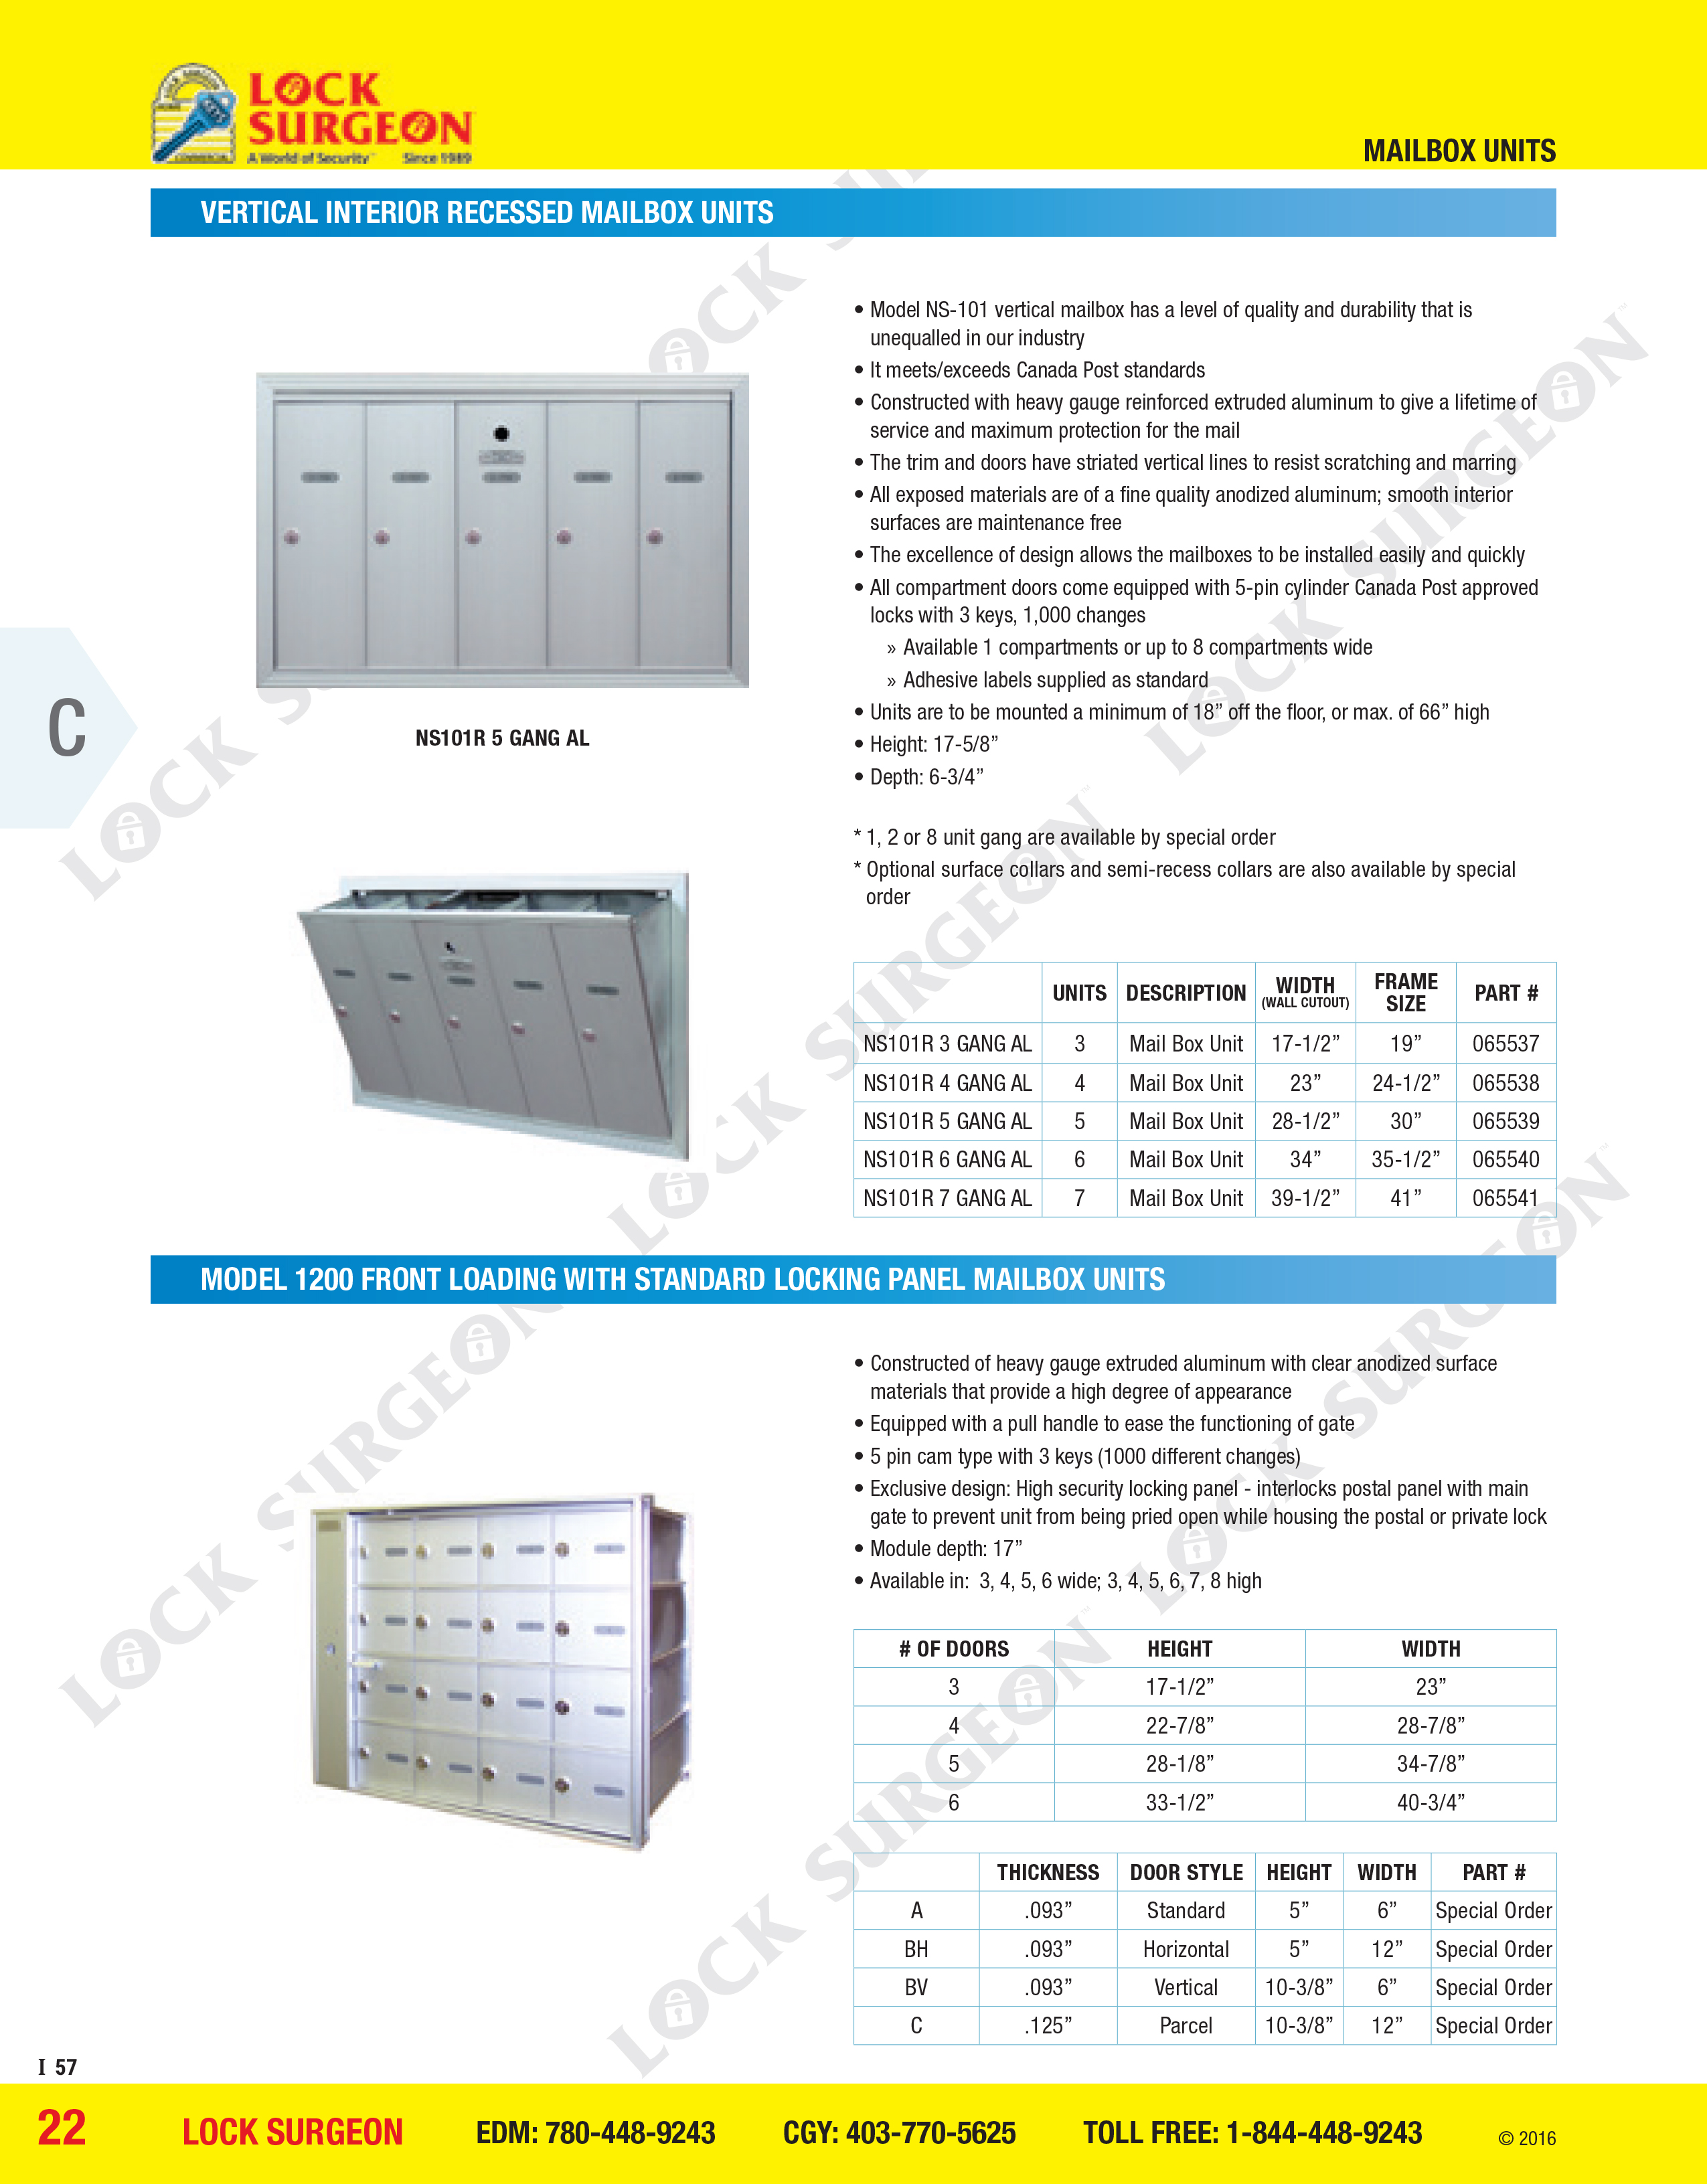 Vertical interior recessed mailbox units, Model 1200 front loading standard panel mailbox units